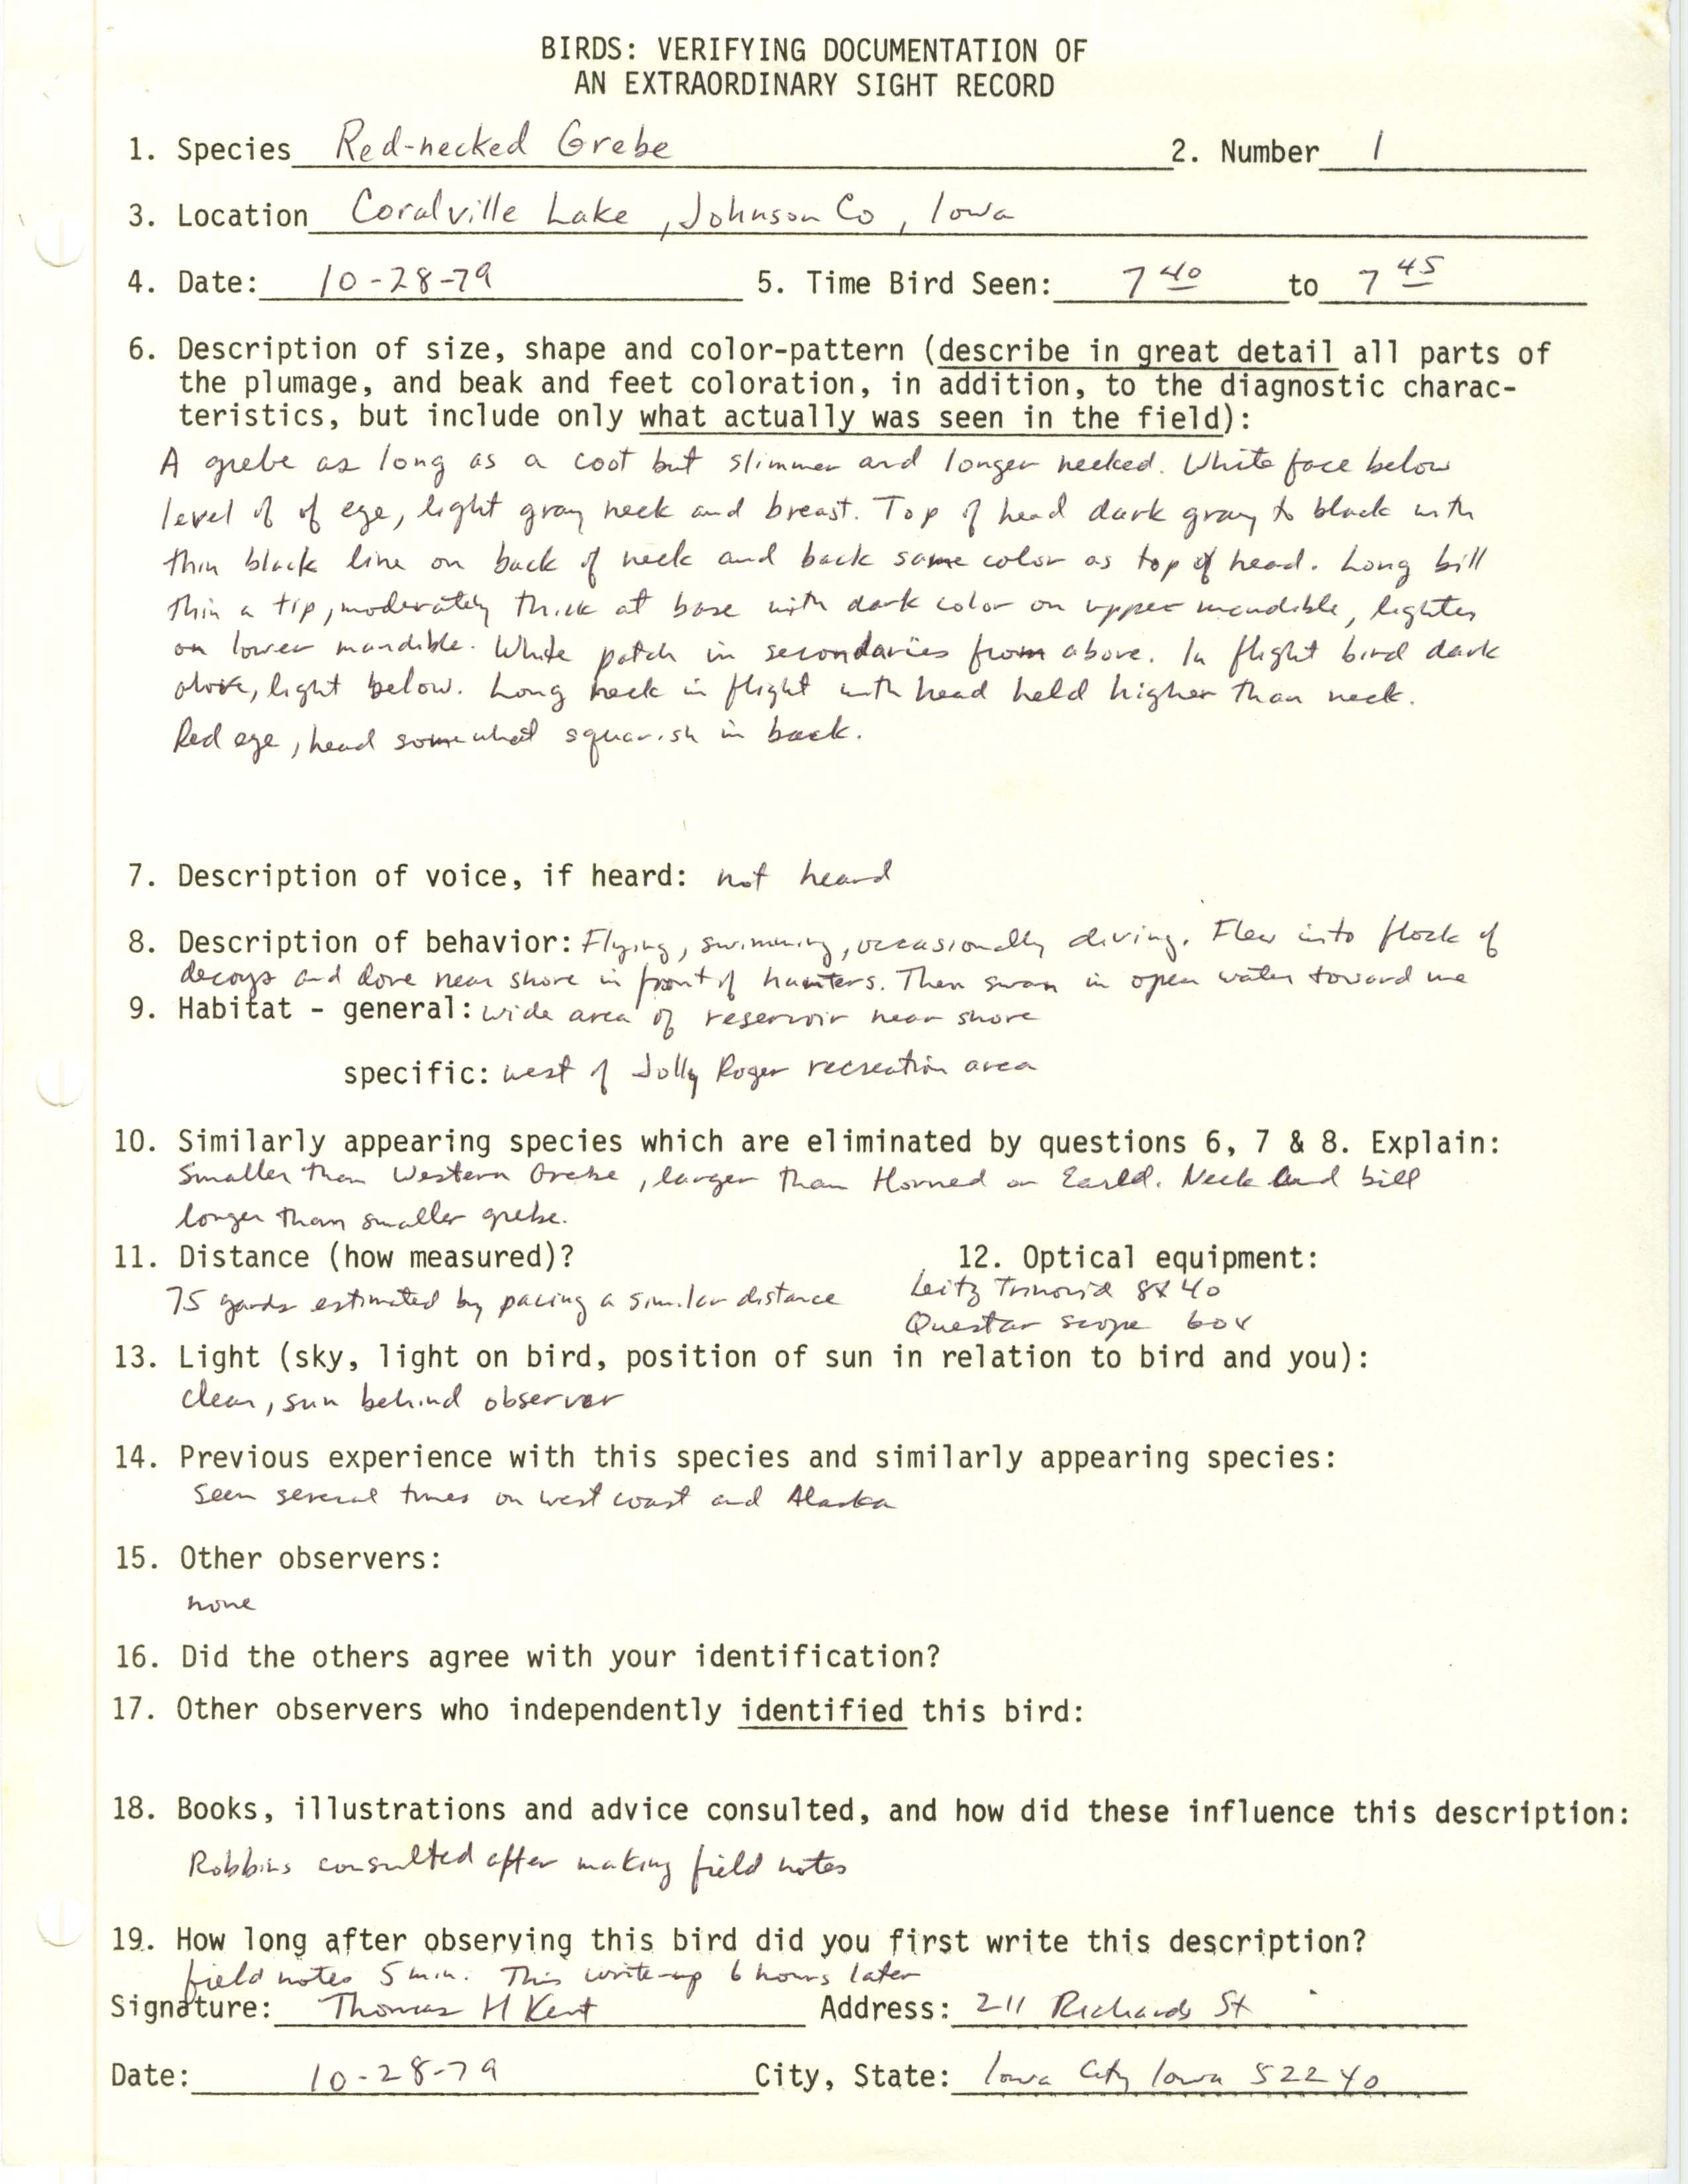 Rare bird documentation form for Red-necked Grebe at Coralville Lake, 1979